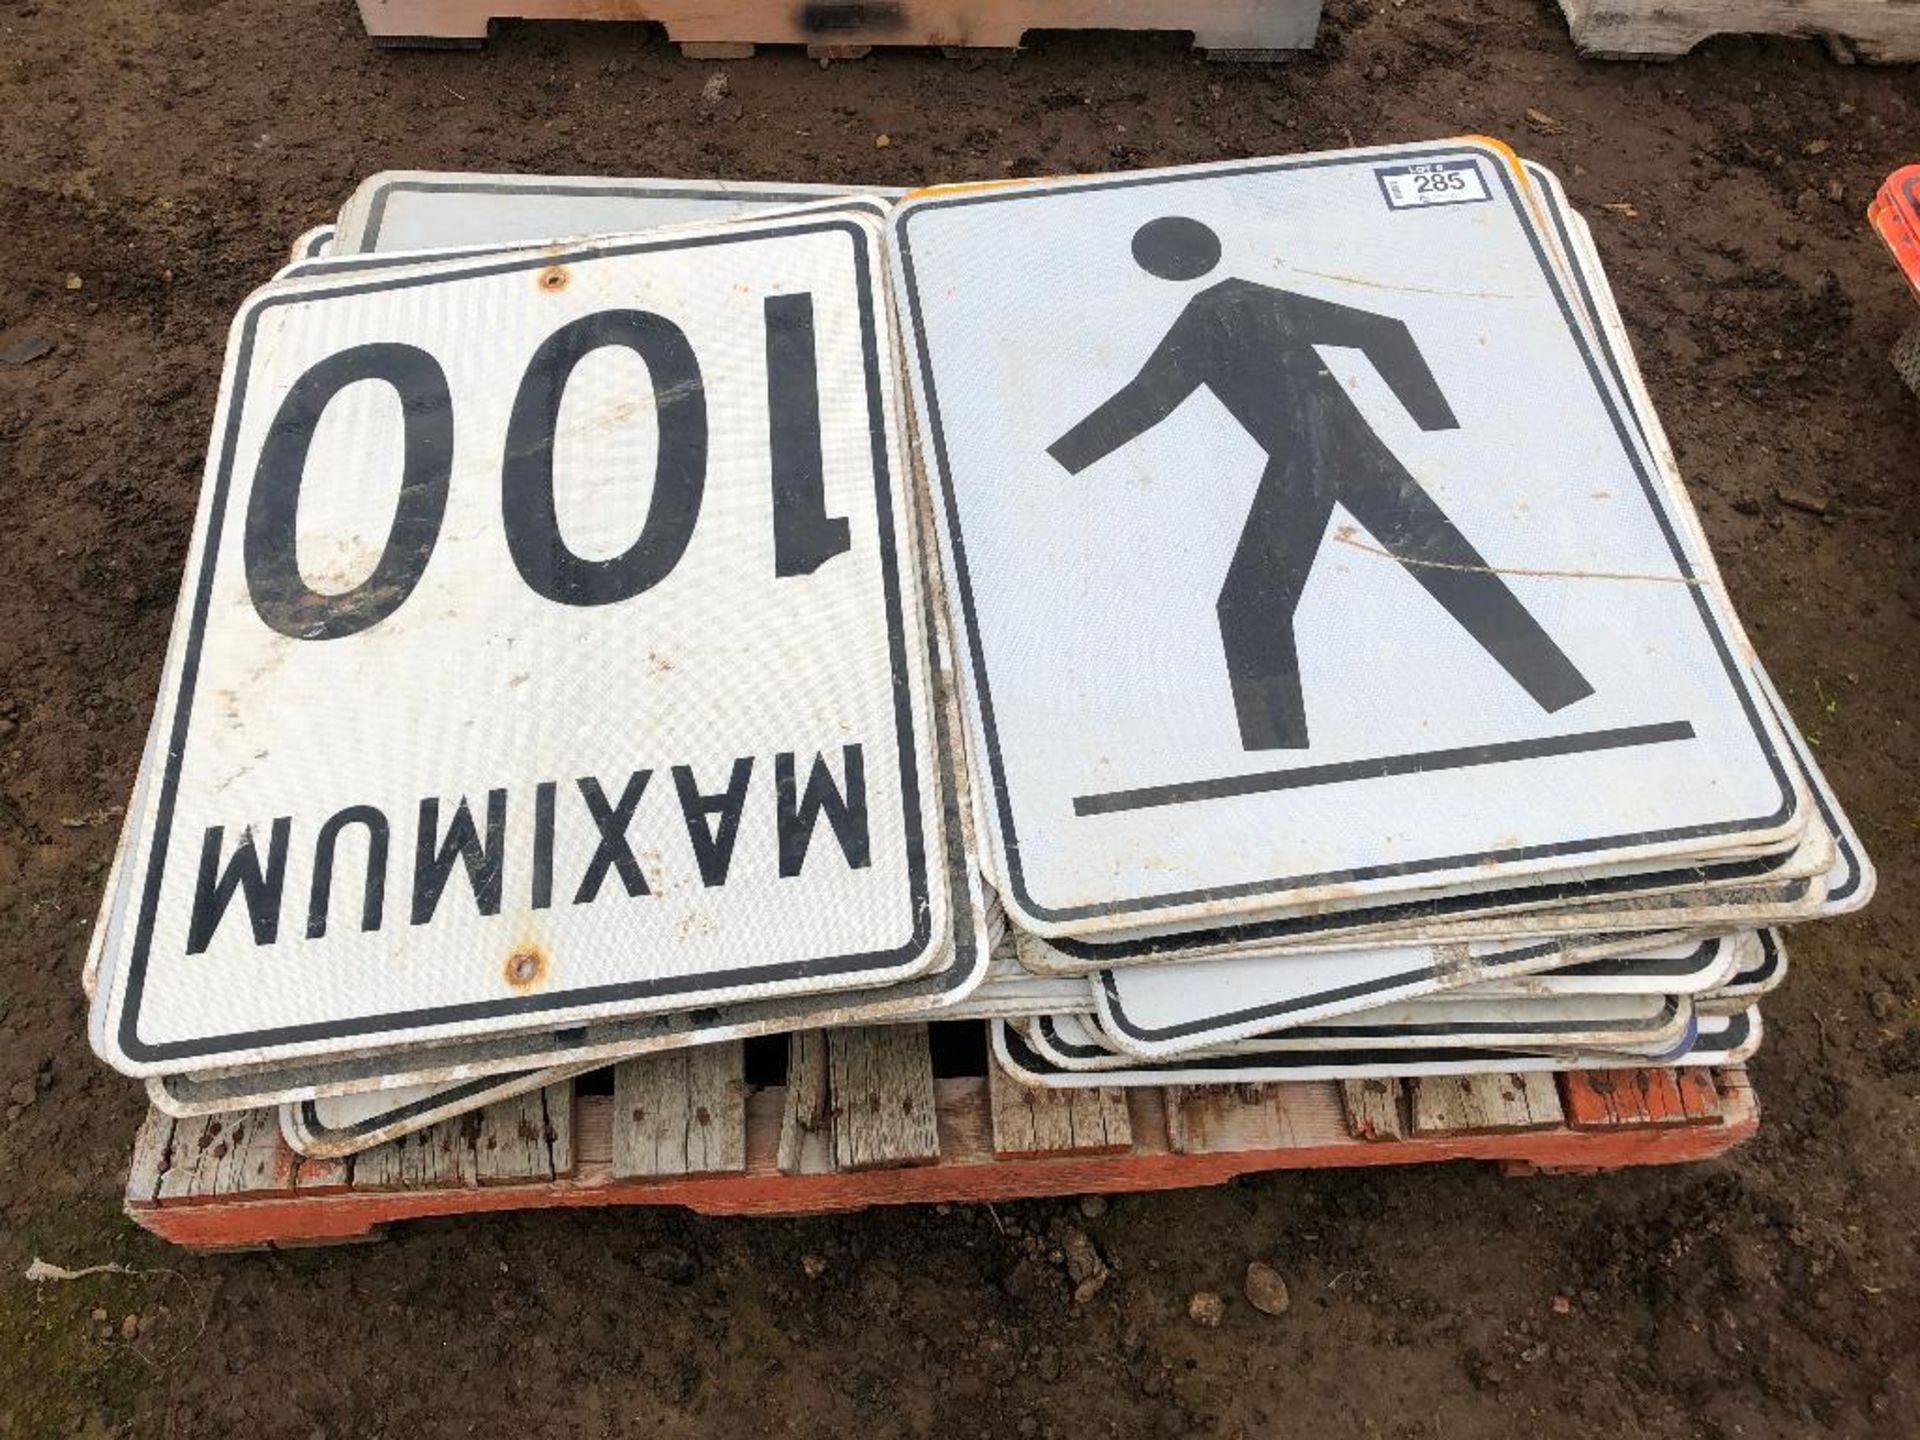 Pallet of Asst. Road Signs including Pedestrian Crossing, 10 - 100 Maximum, etc. - Image 2 of 3